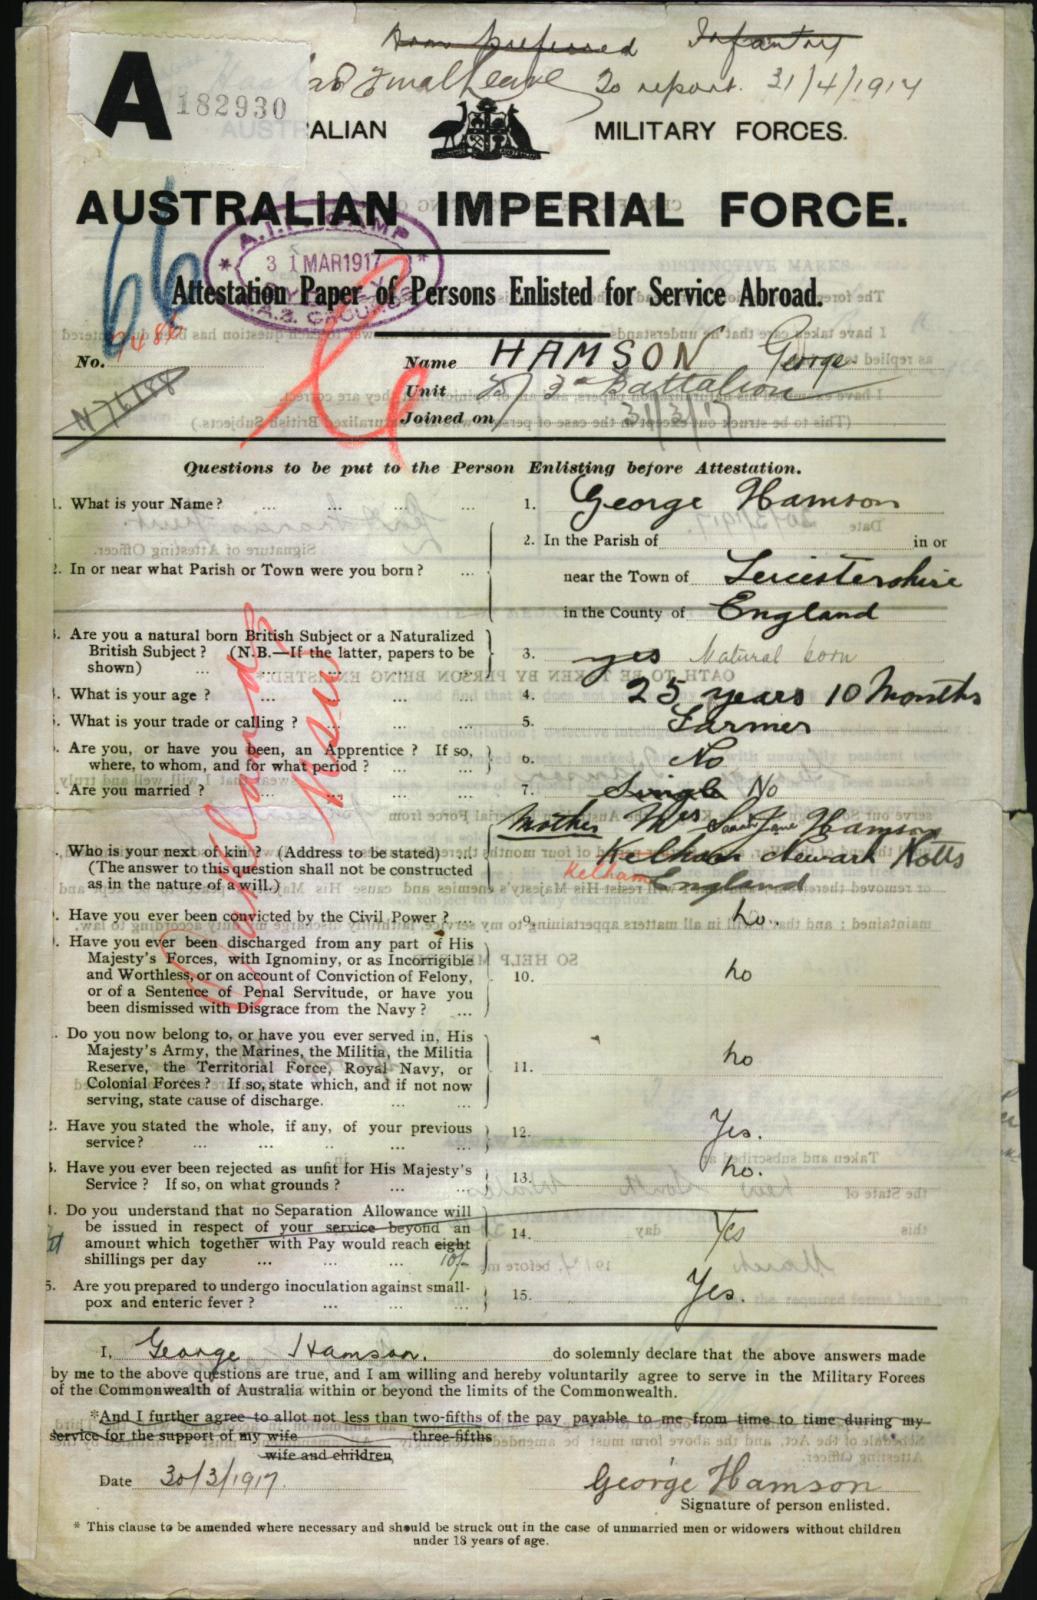 Private George Hamson, enlistment papers